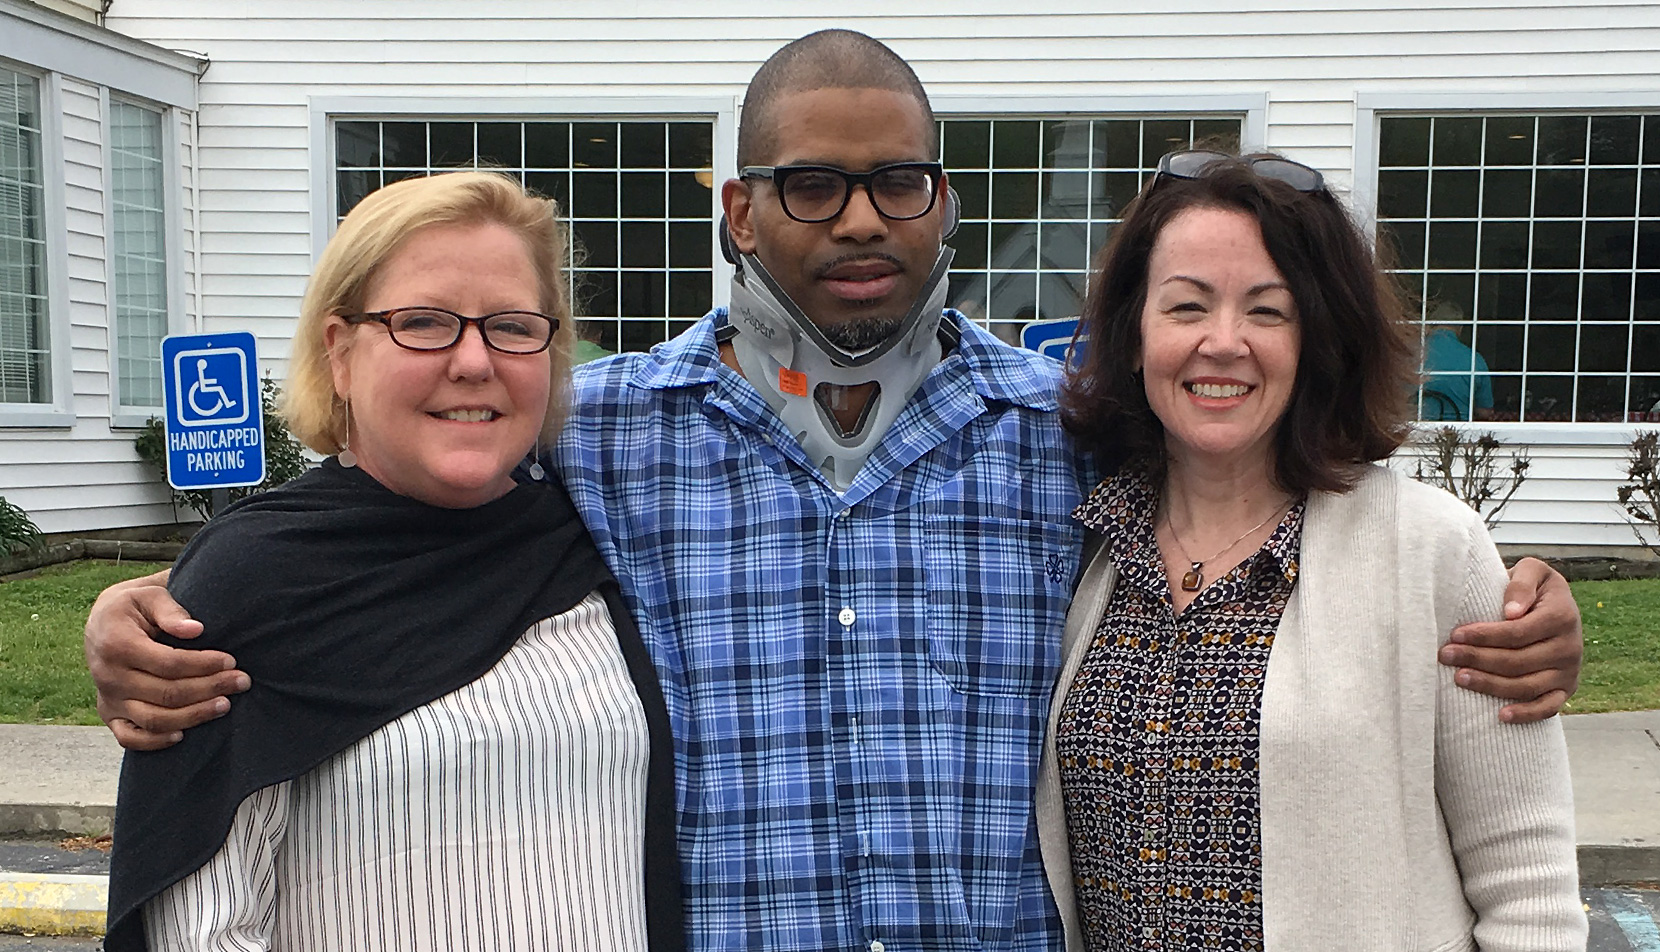  Innocence Project Client’s Story Inspires $100,000 Donation 